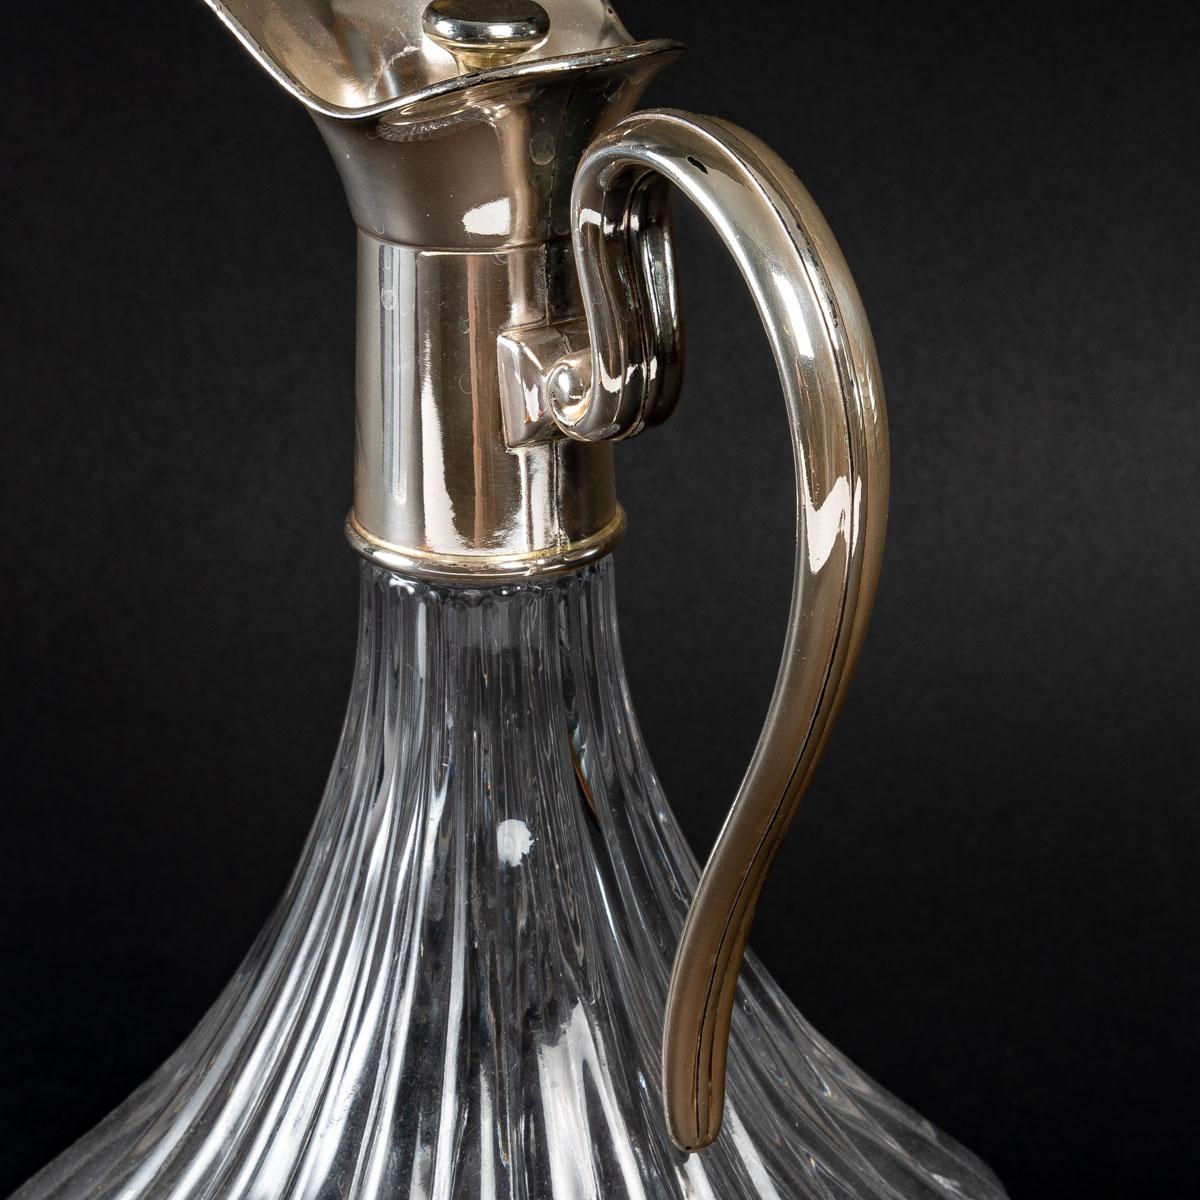 Decanter and its stopper, 20th century
Glass and silver plated decanter and stopper, 20th century.
Measures: H: 27 cm, d: 19 cm
SM0713.